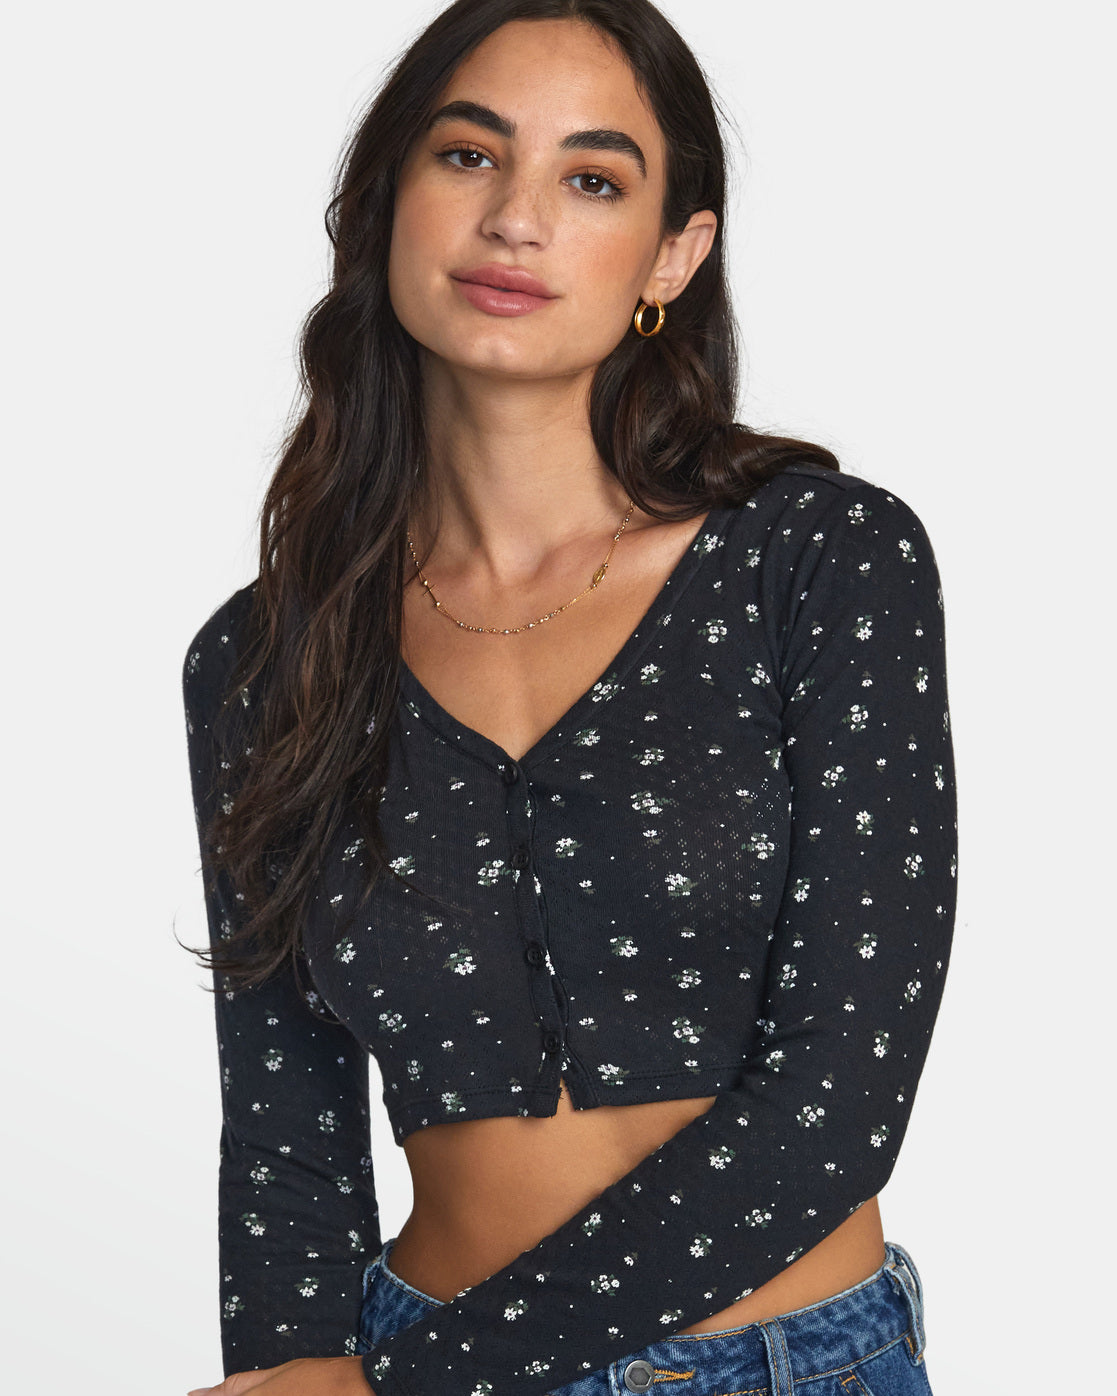 RVCA Homecoming Pointelle Long Sleeve Top - RVCA Black